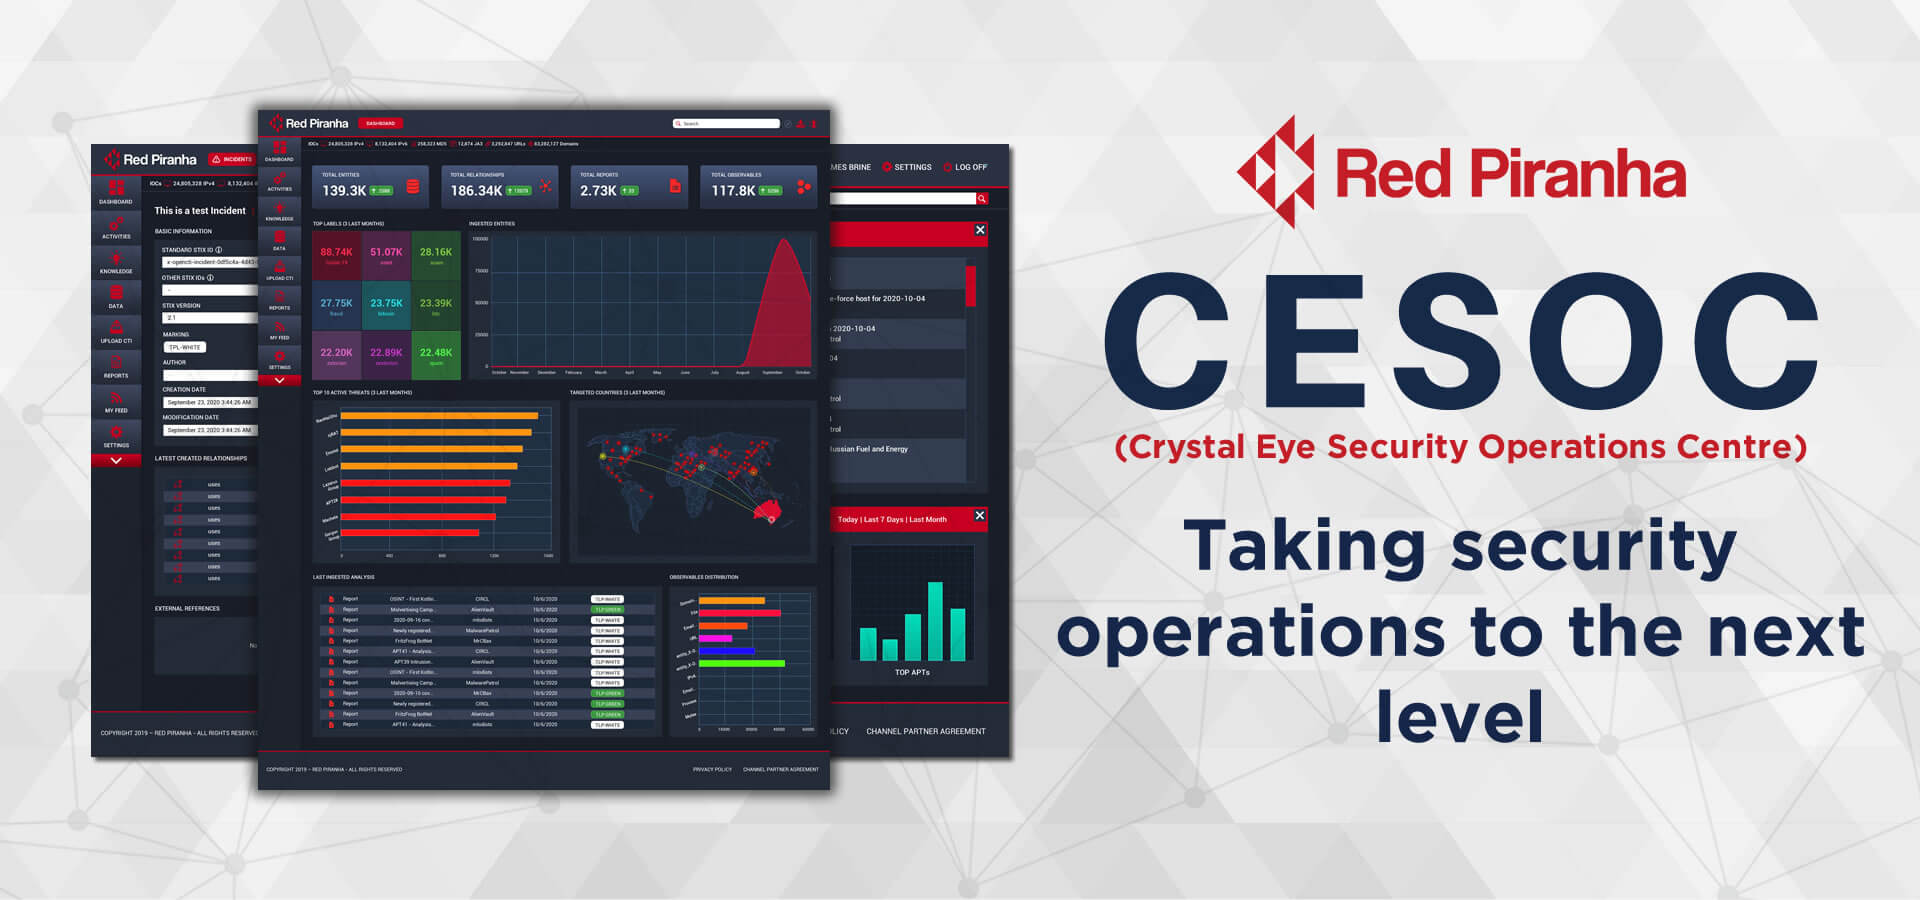 Crystal Eye Security Operations Centre